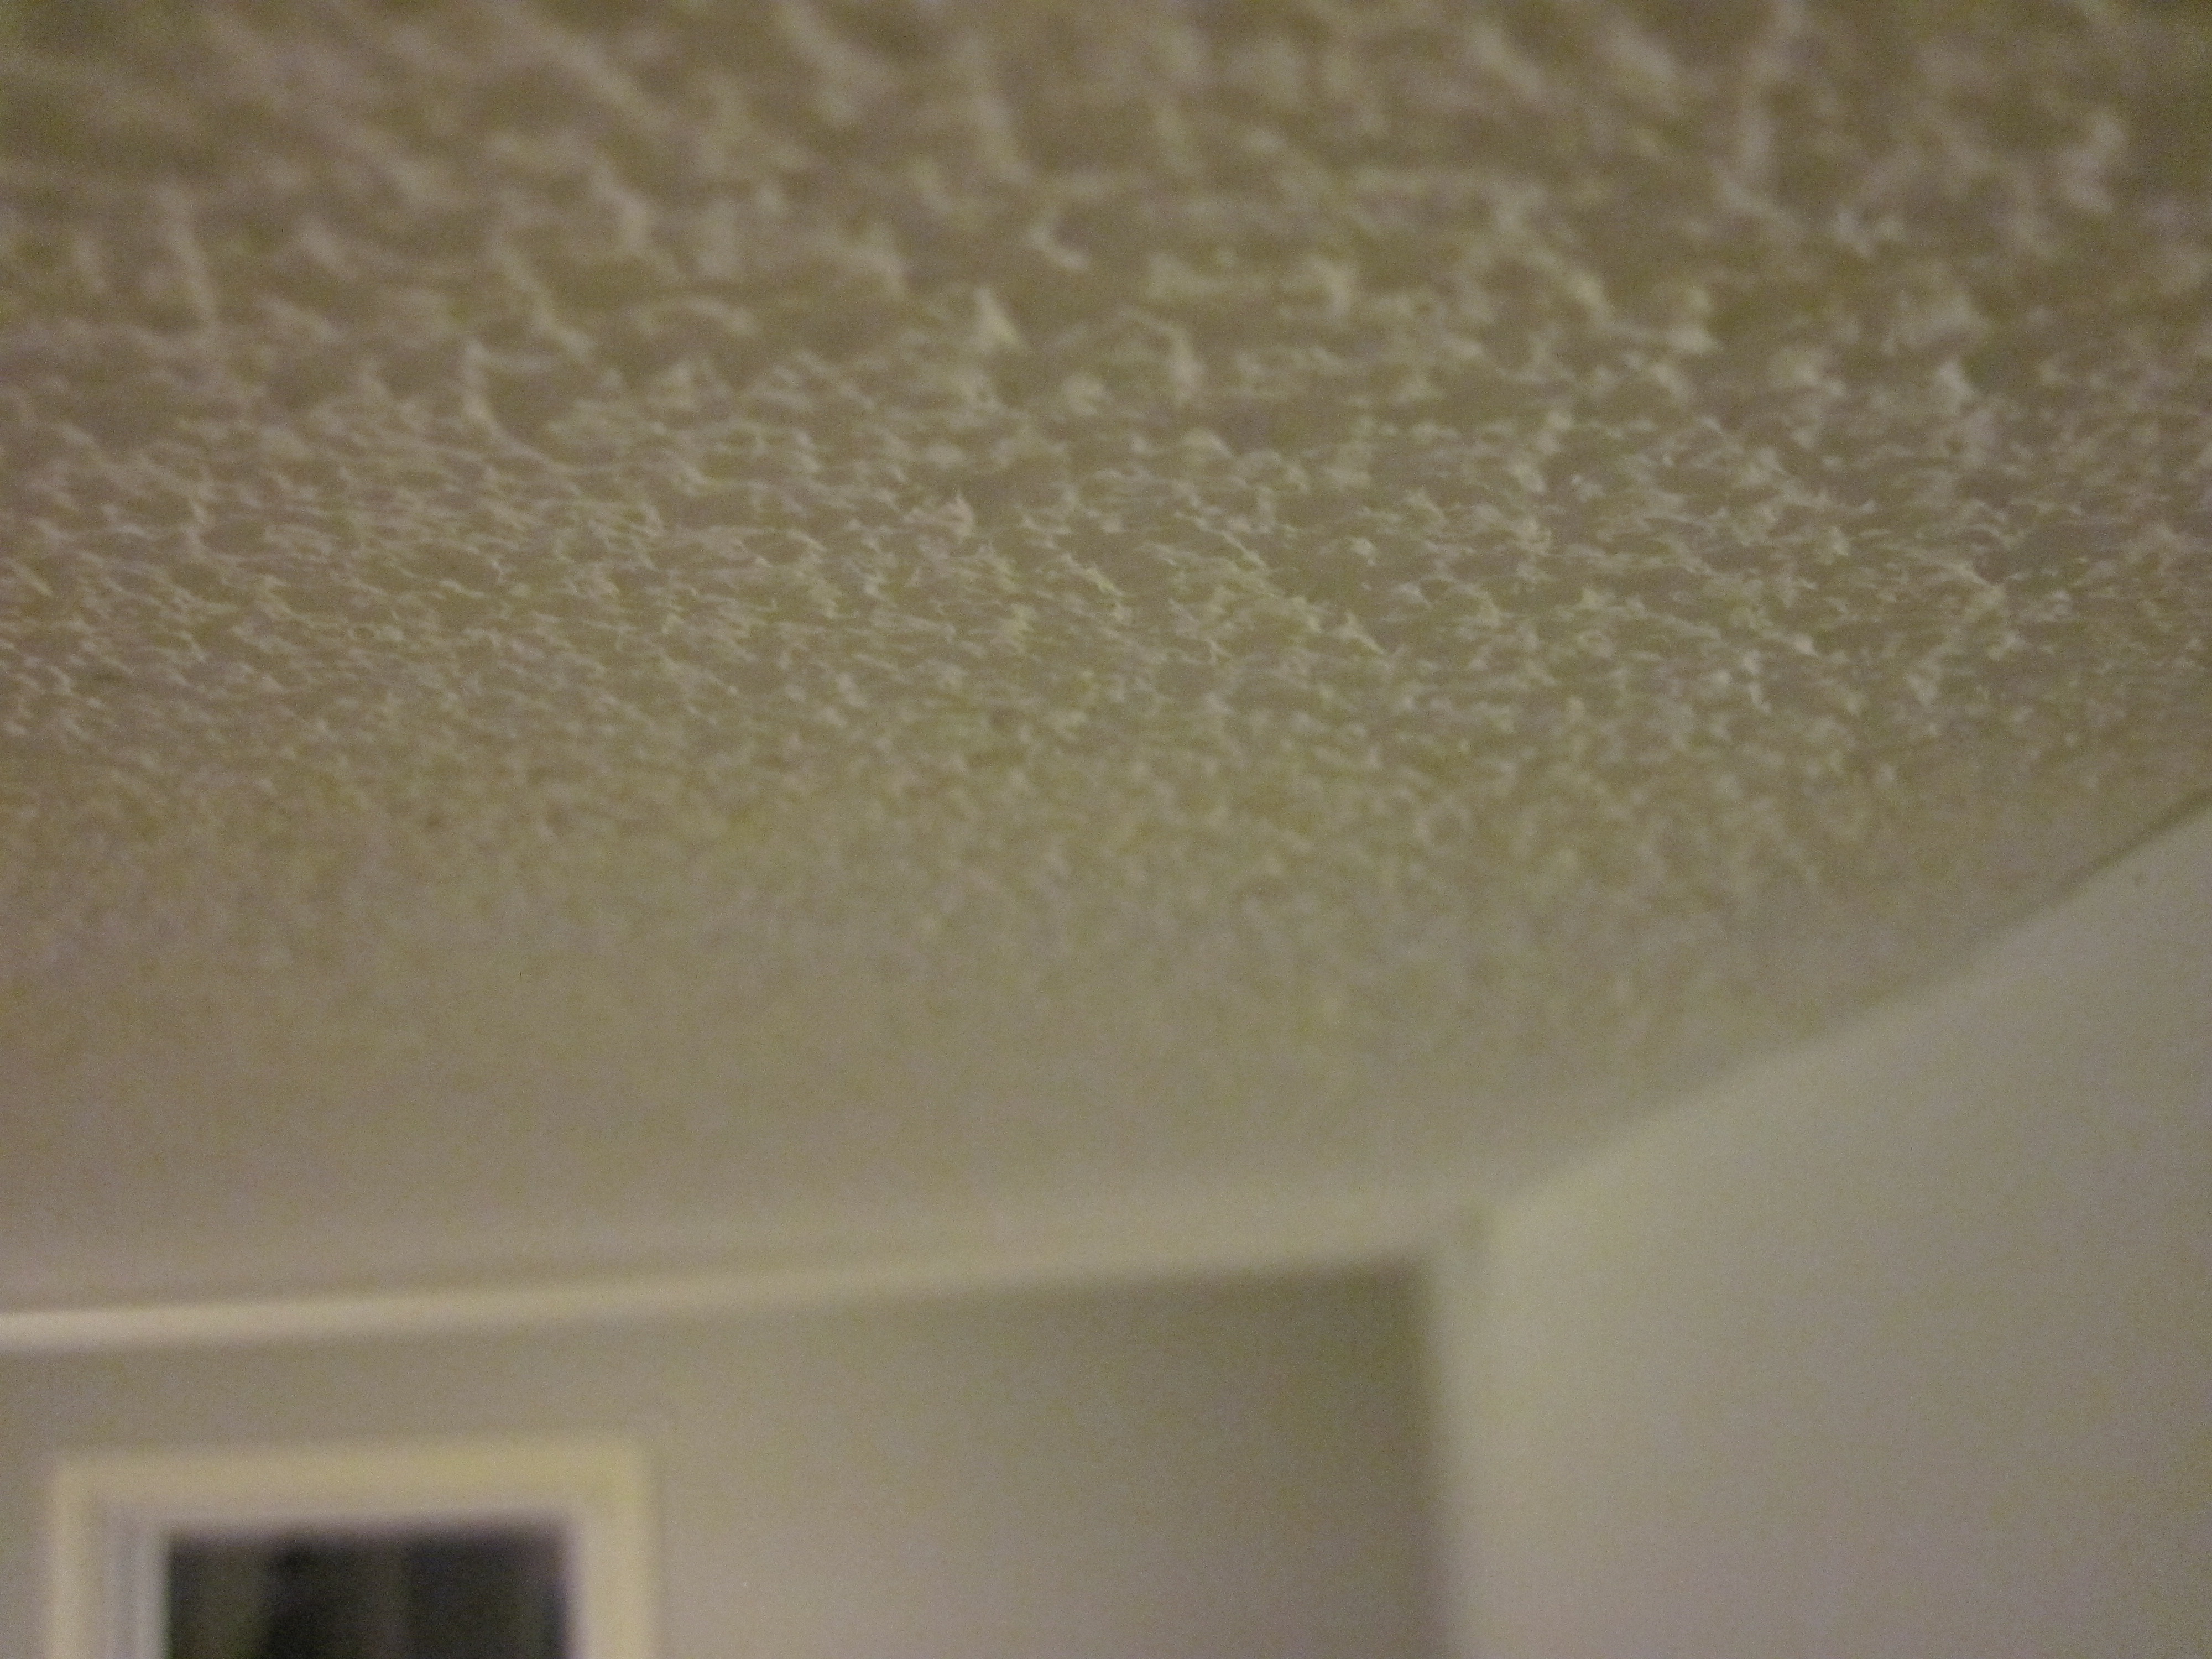 How to Remove Wallpaper or Popcorn Ceilings